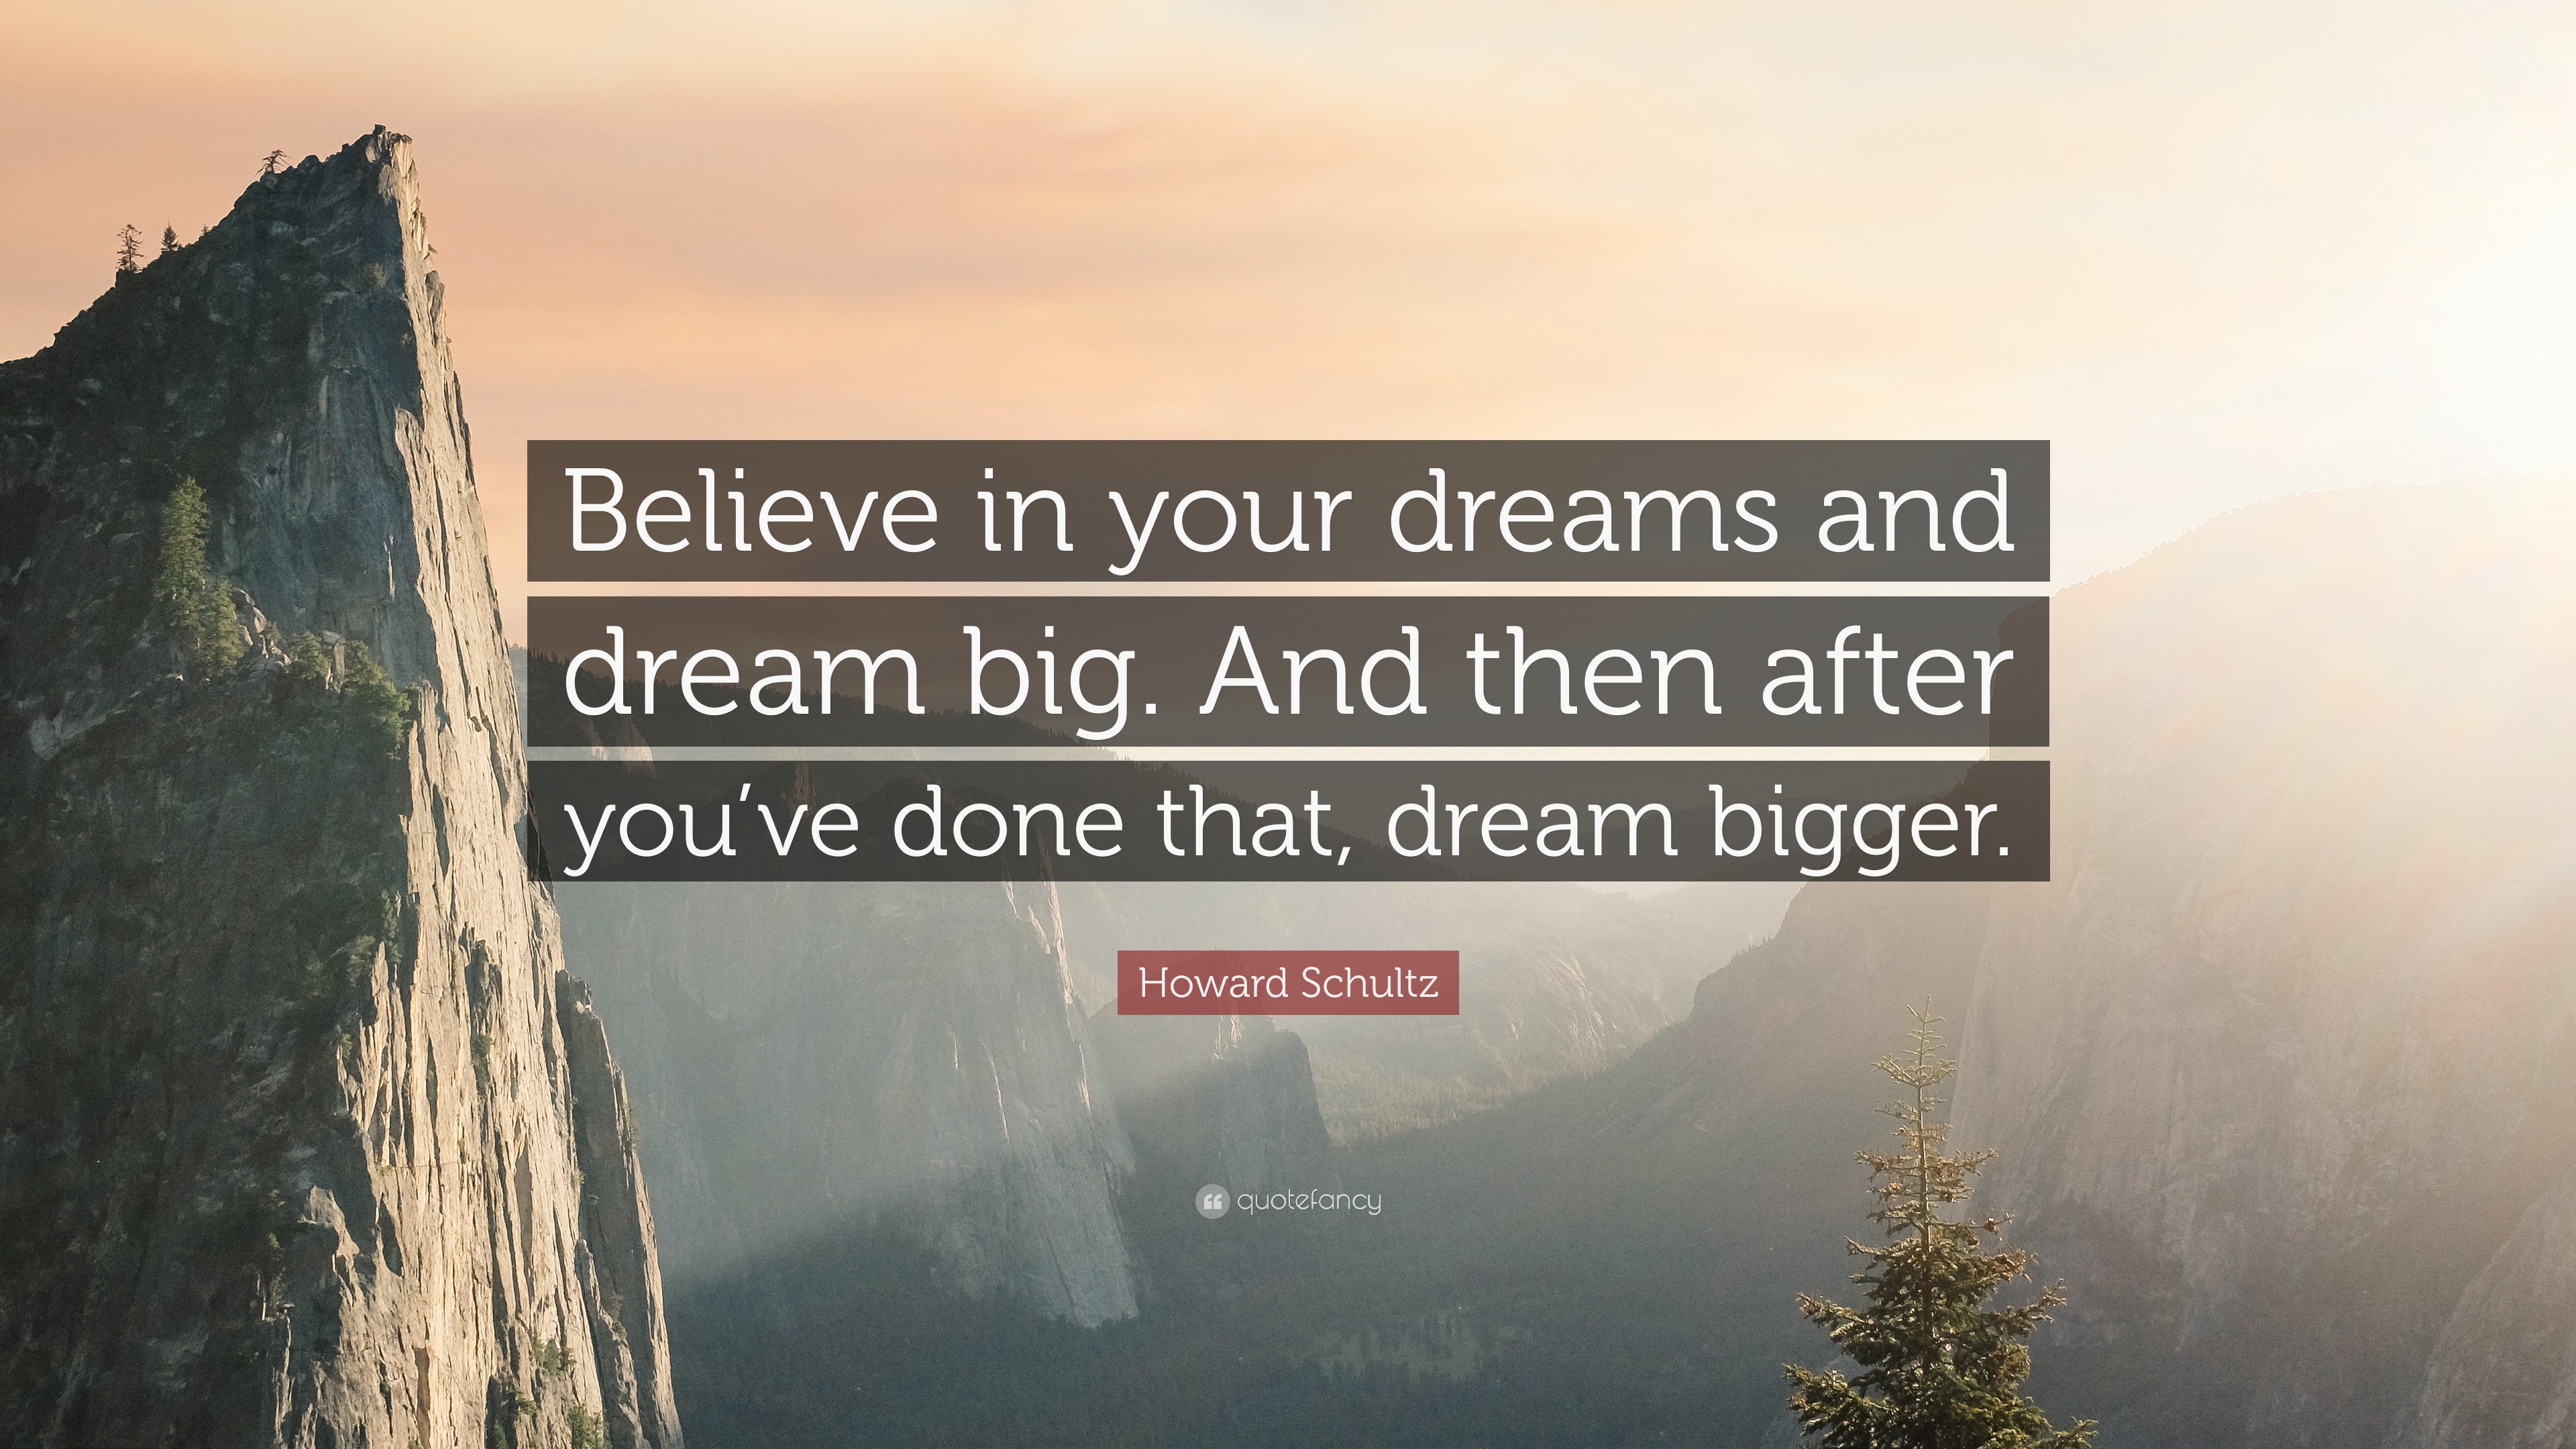 Howard Schultz Quote: “Believe in your dreams and dream big. And then